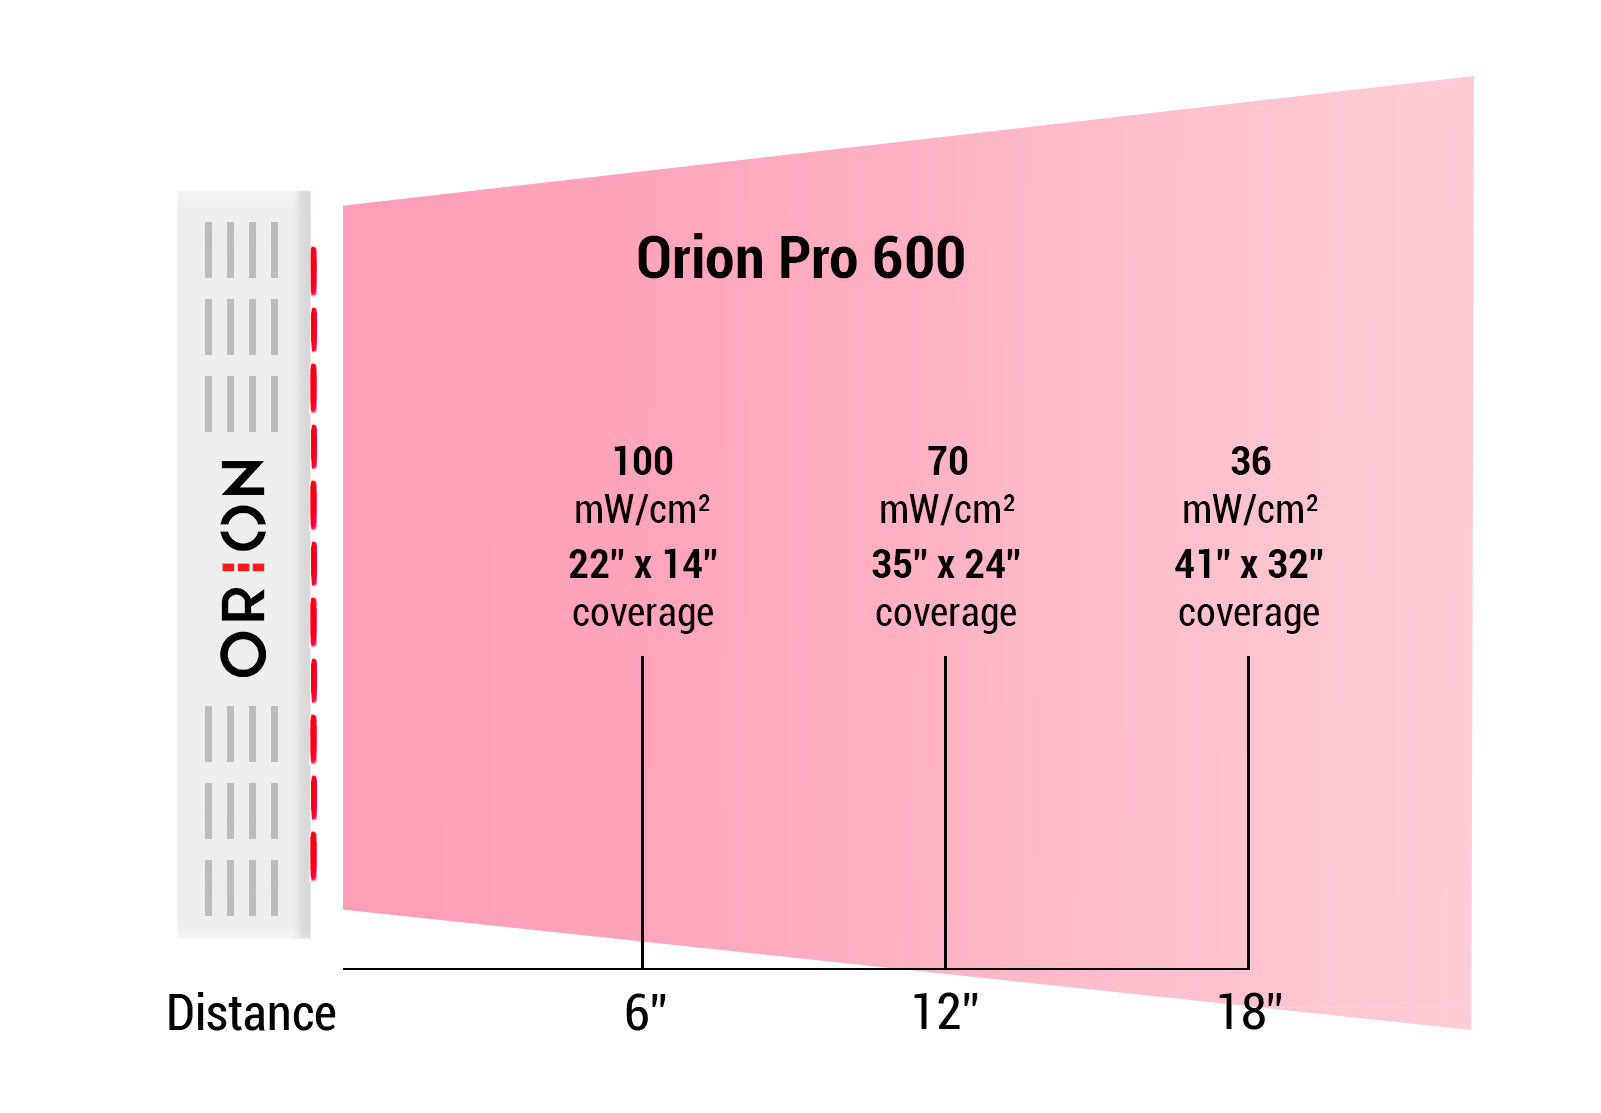 Irradiance levels of Orion Red Light Therapy at 3, 6, 12, and 18 inches. Orion Pro 600.